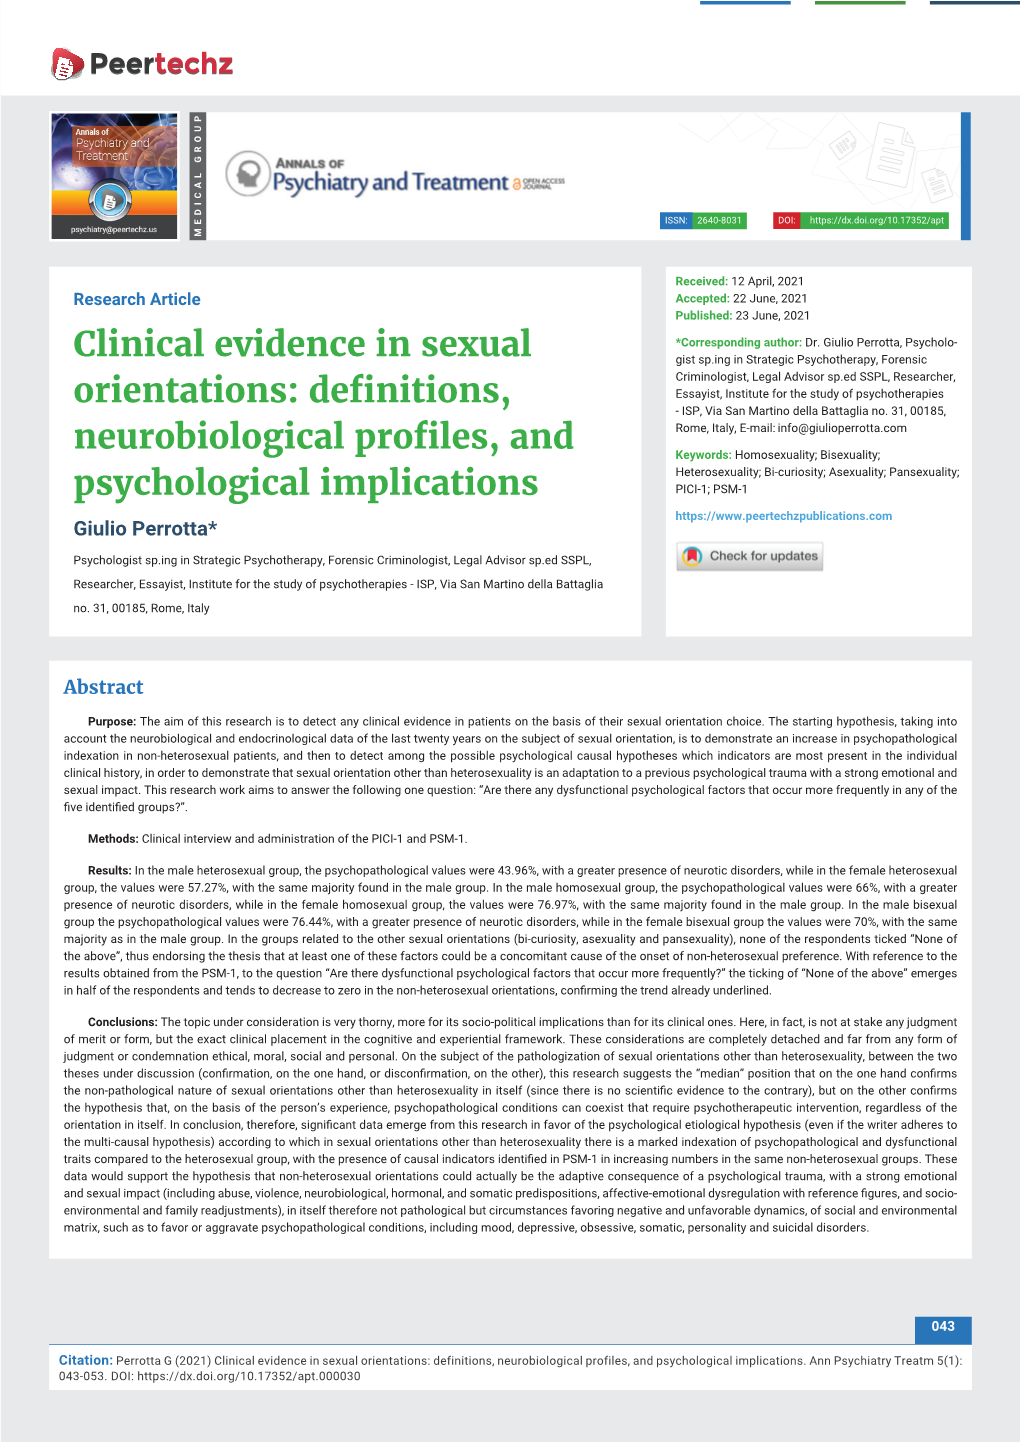 Clinical Evidence in Sexual Orientations: Definitions, Neurobiological Profiles, and Psychological Implications